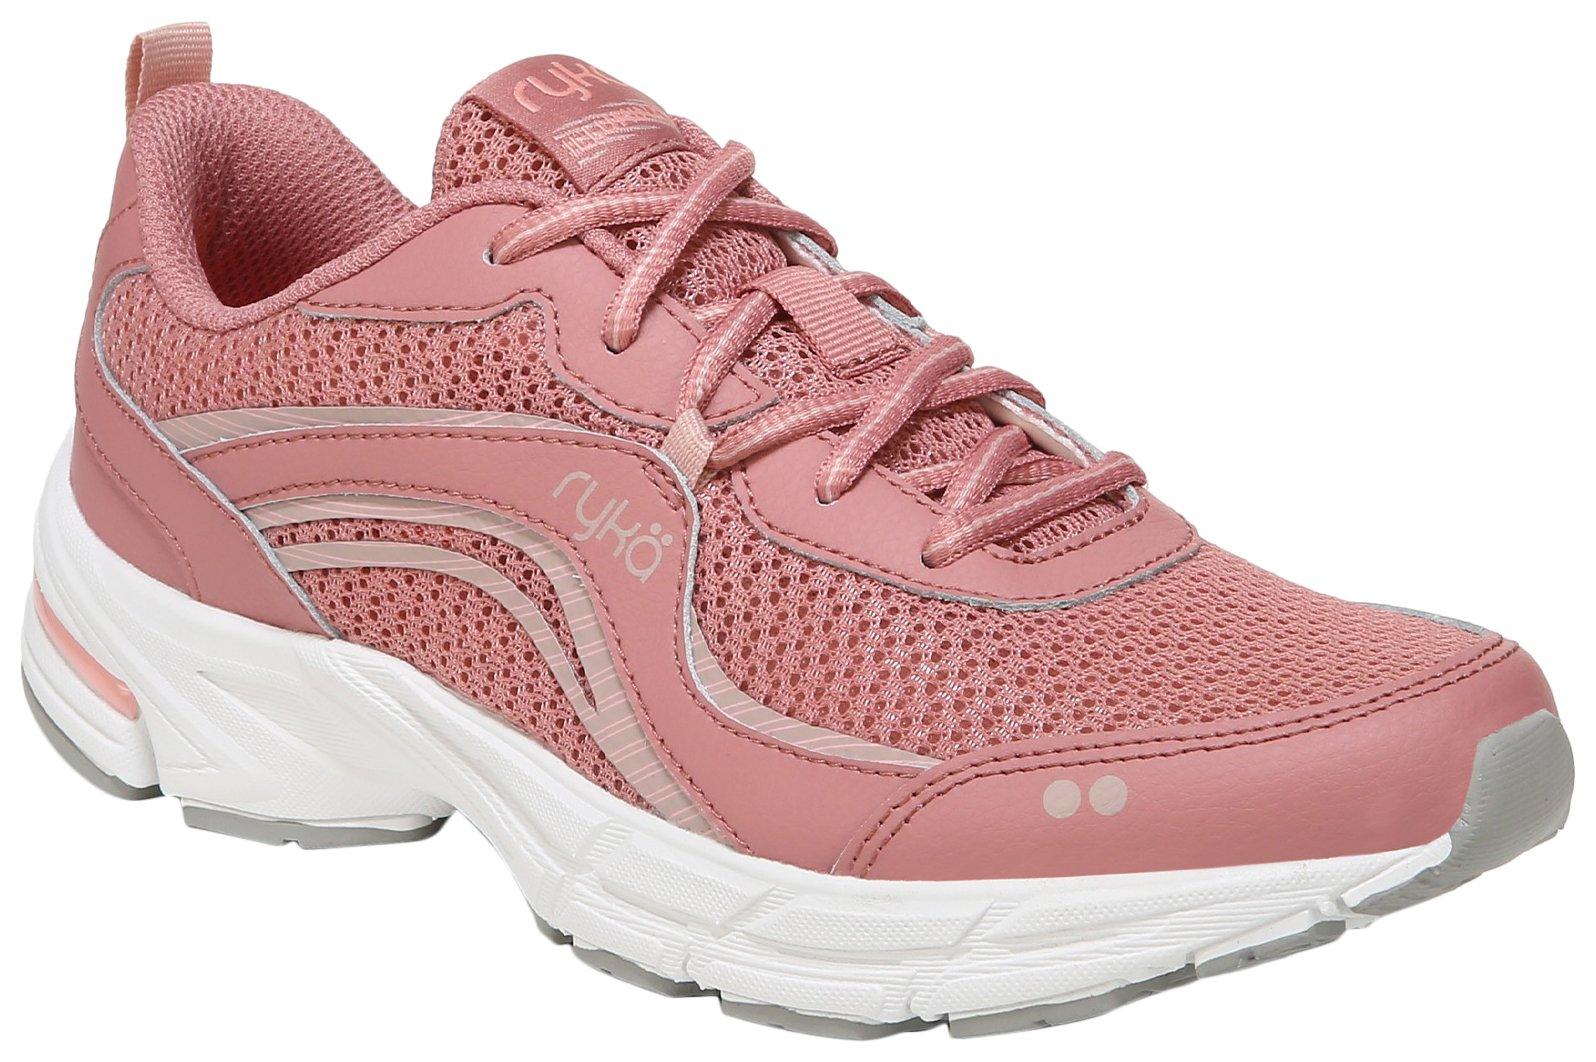 Ryka Athletic Shoes Made for Women